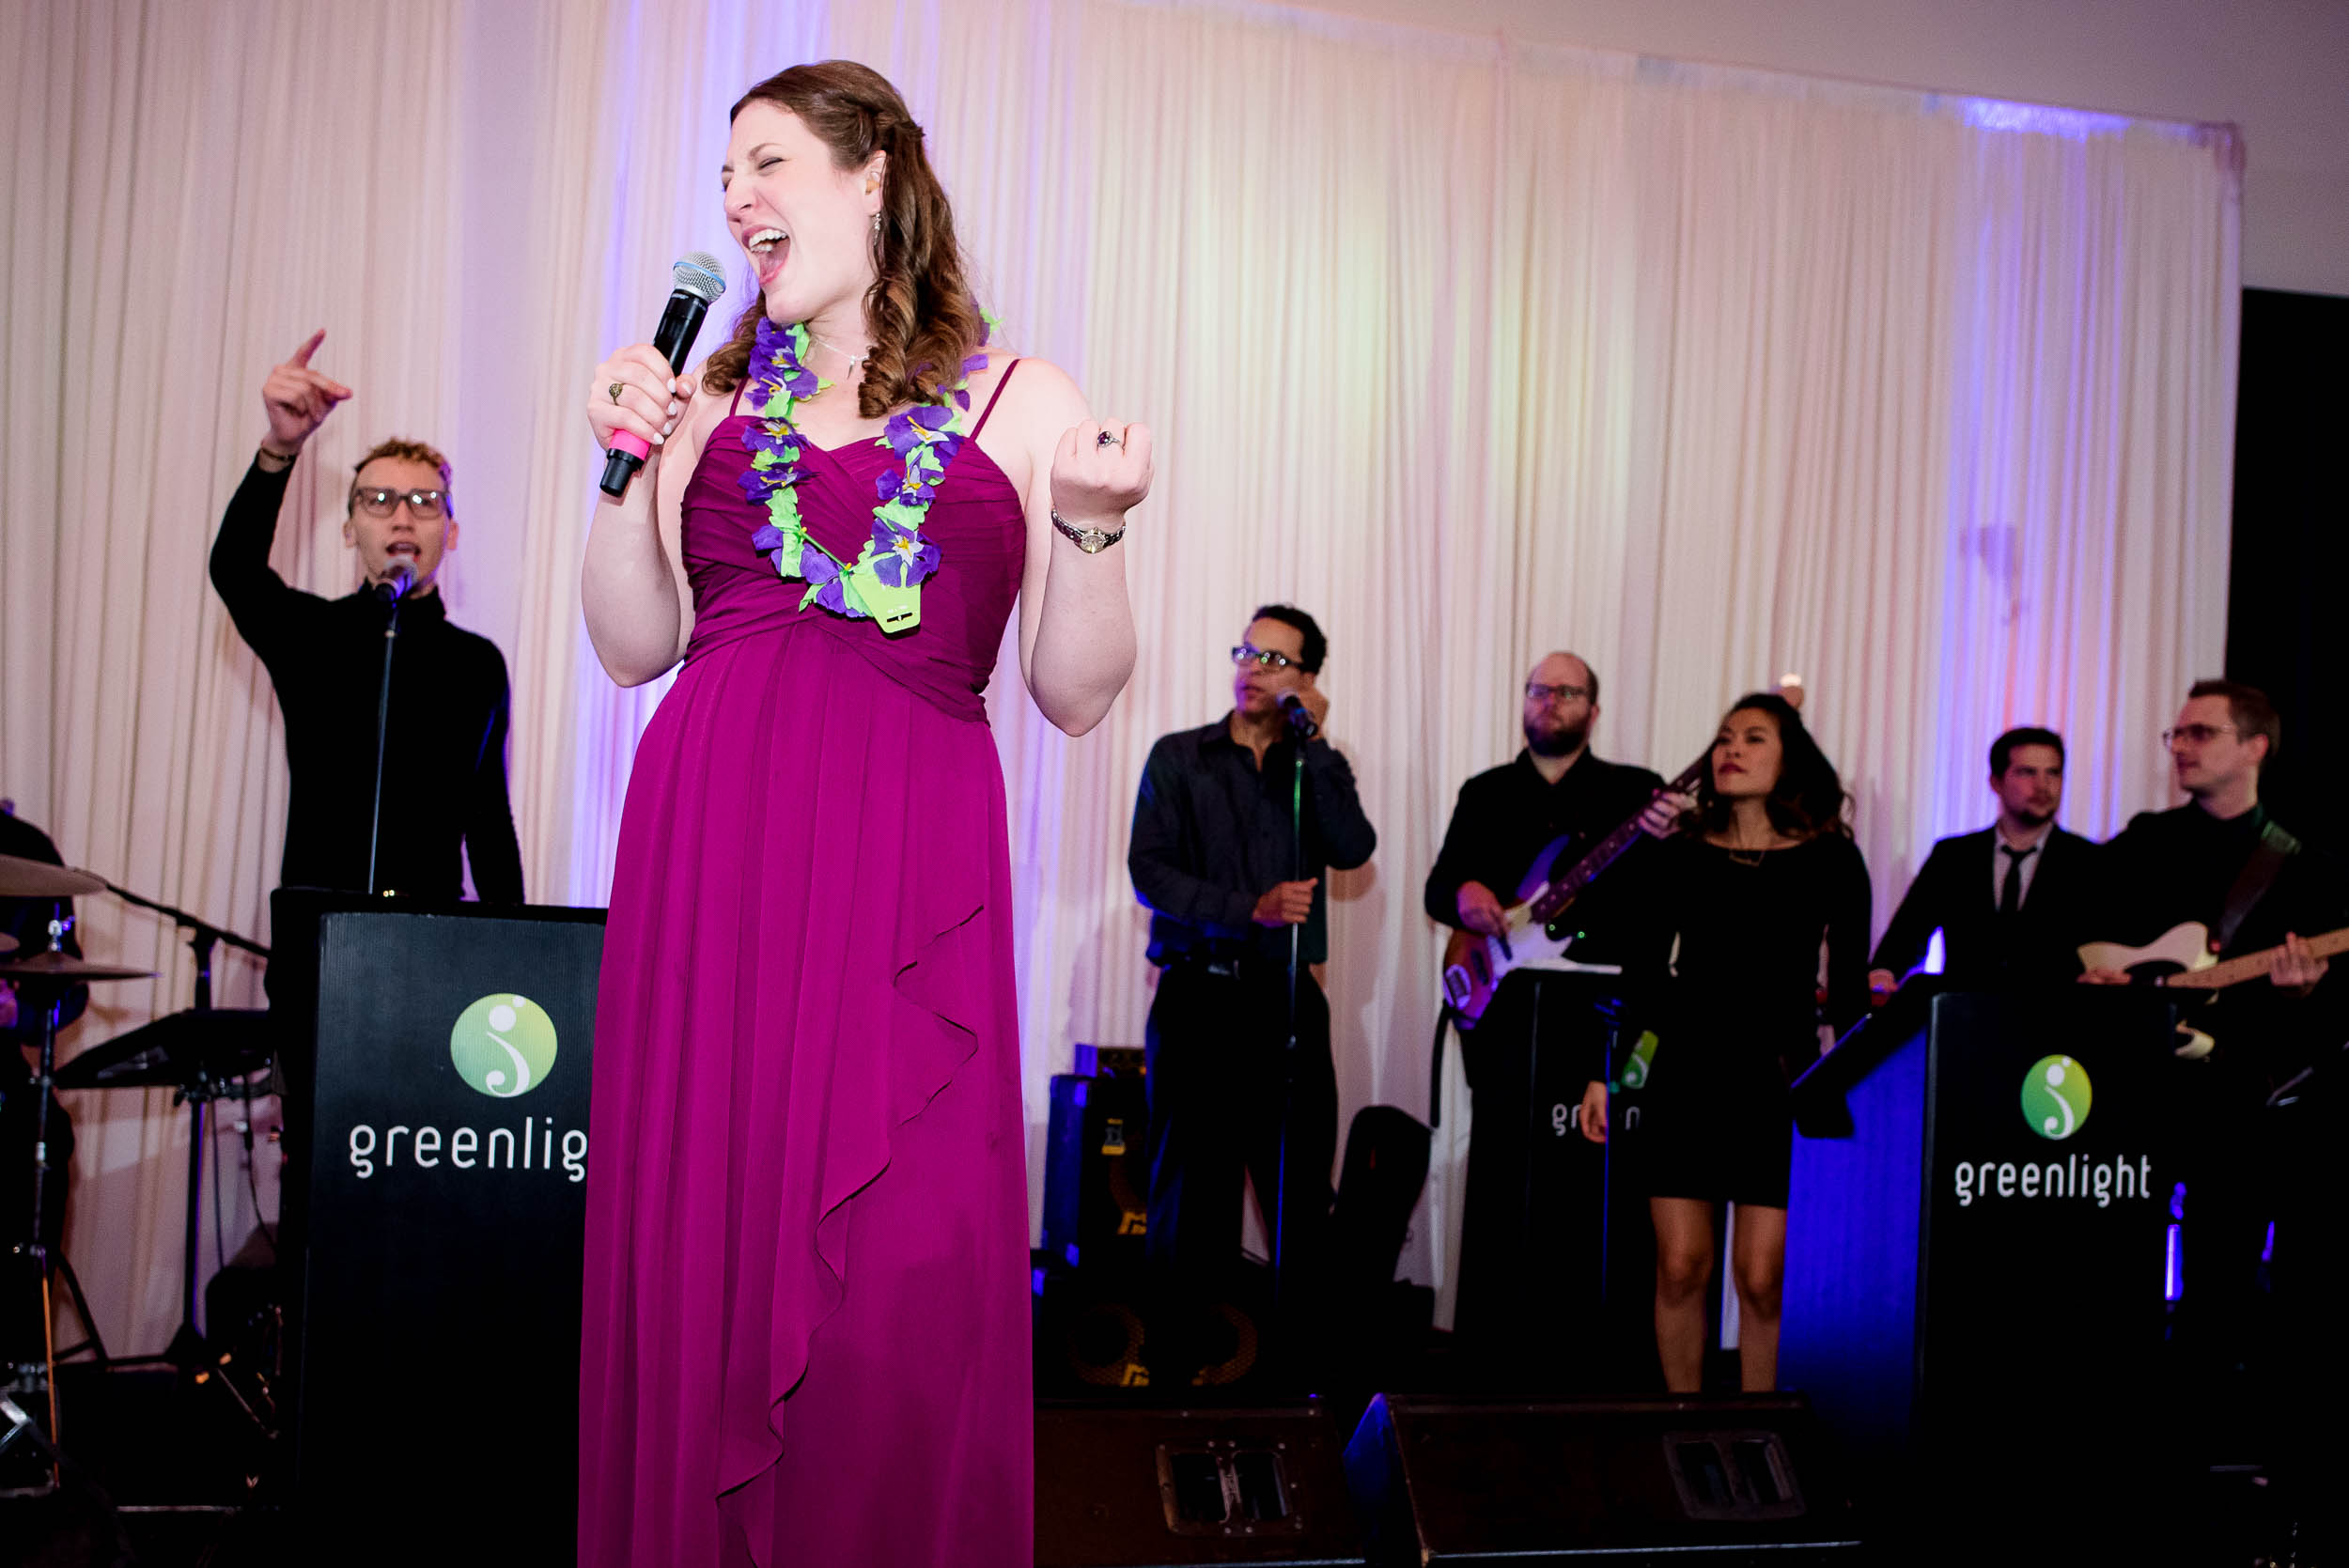 Maid of honor sings with Greenlight band during an Independence Grove Chicago wedding.  